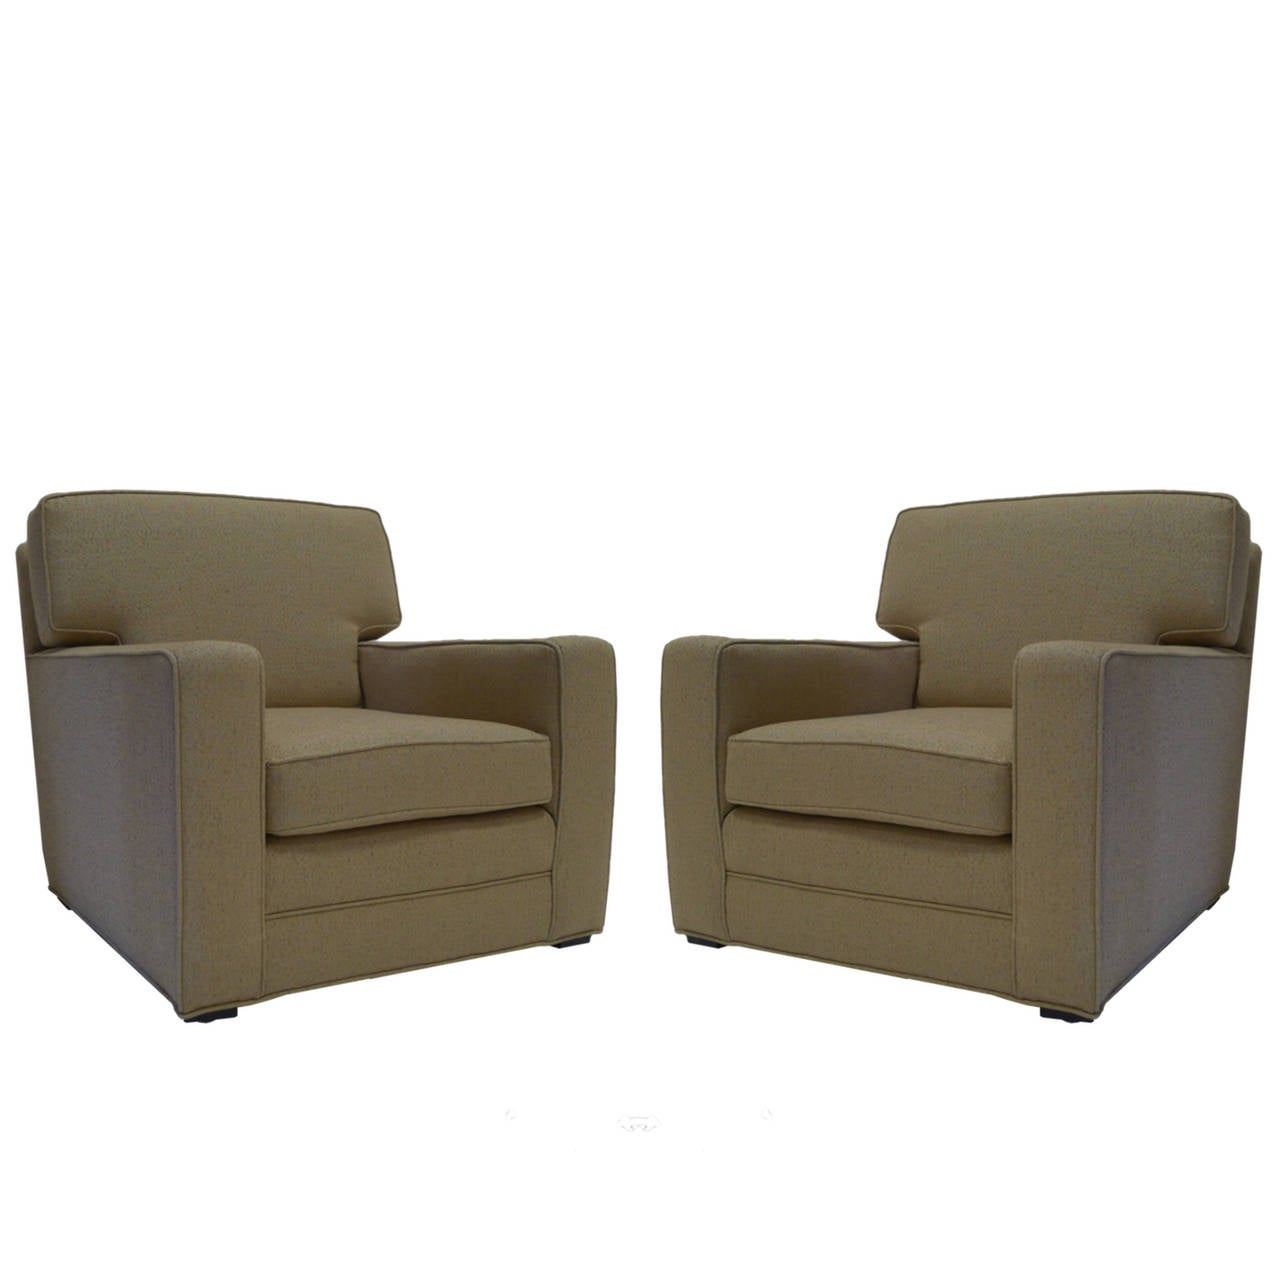 Wood Handsome Pair of Newly Upholstered Art Deco Modernage Lounge Chairs